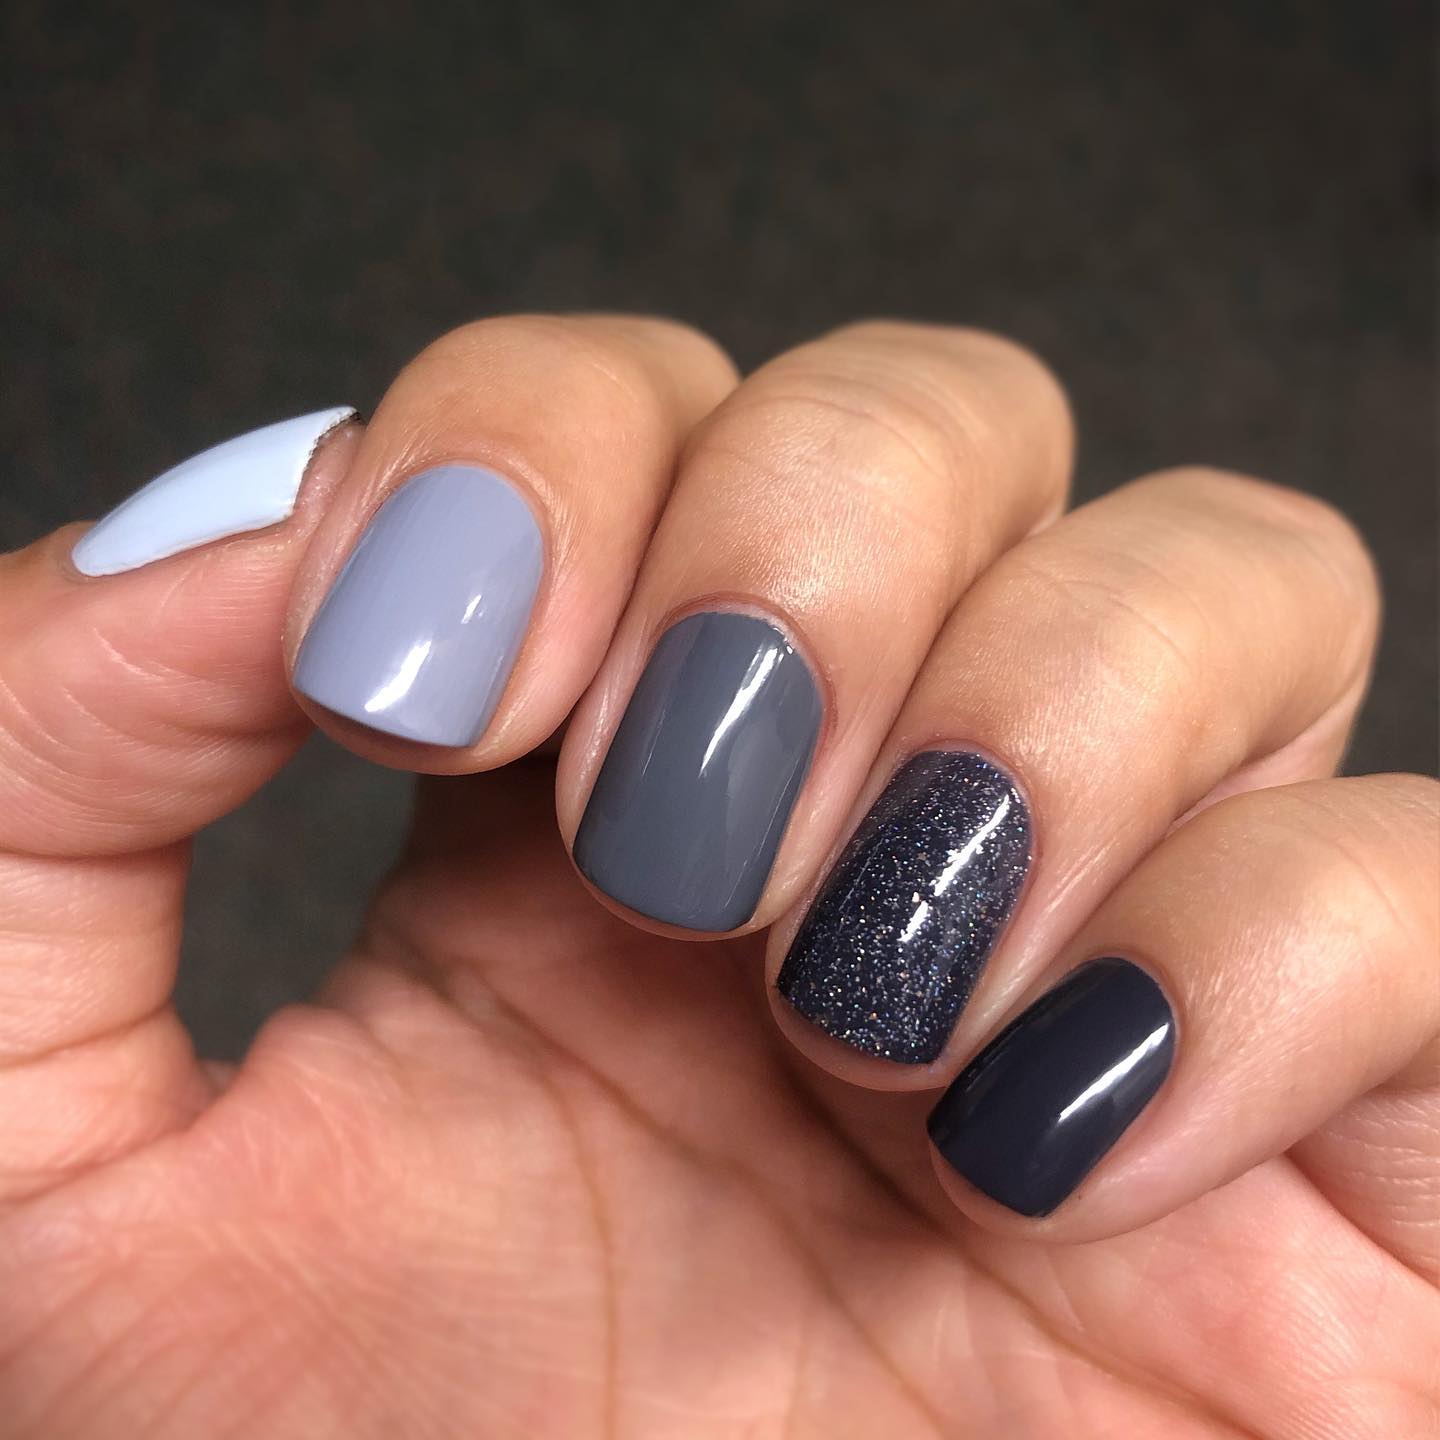 Grey nails such as these will work well for women who enjoy shorter neutral colors. These will also work well for the winter season.